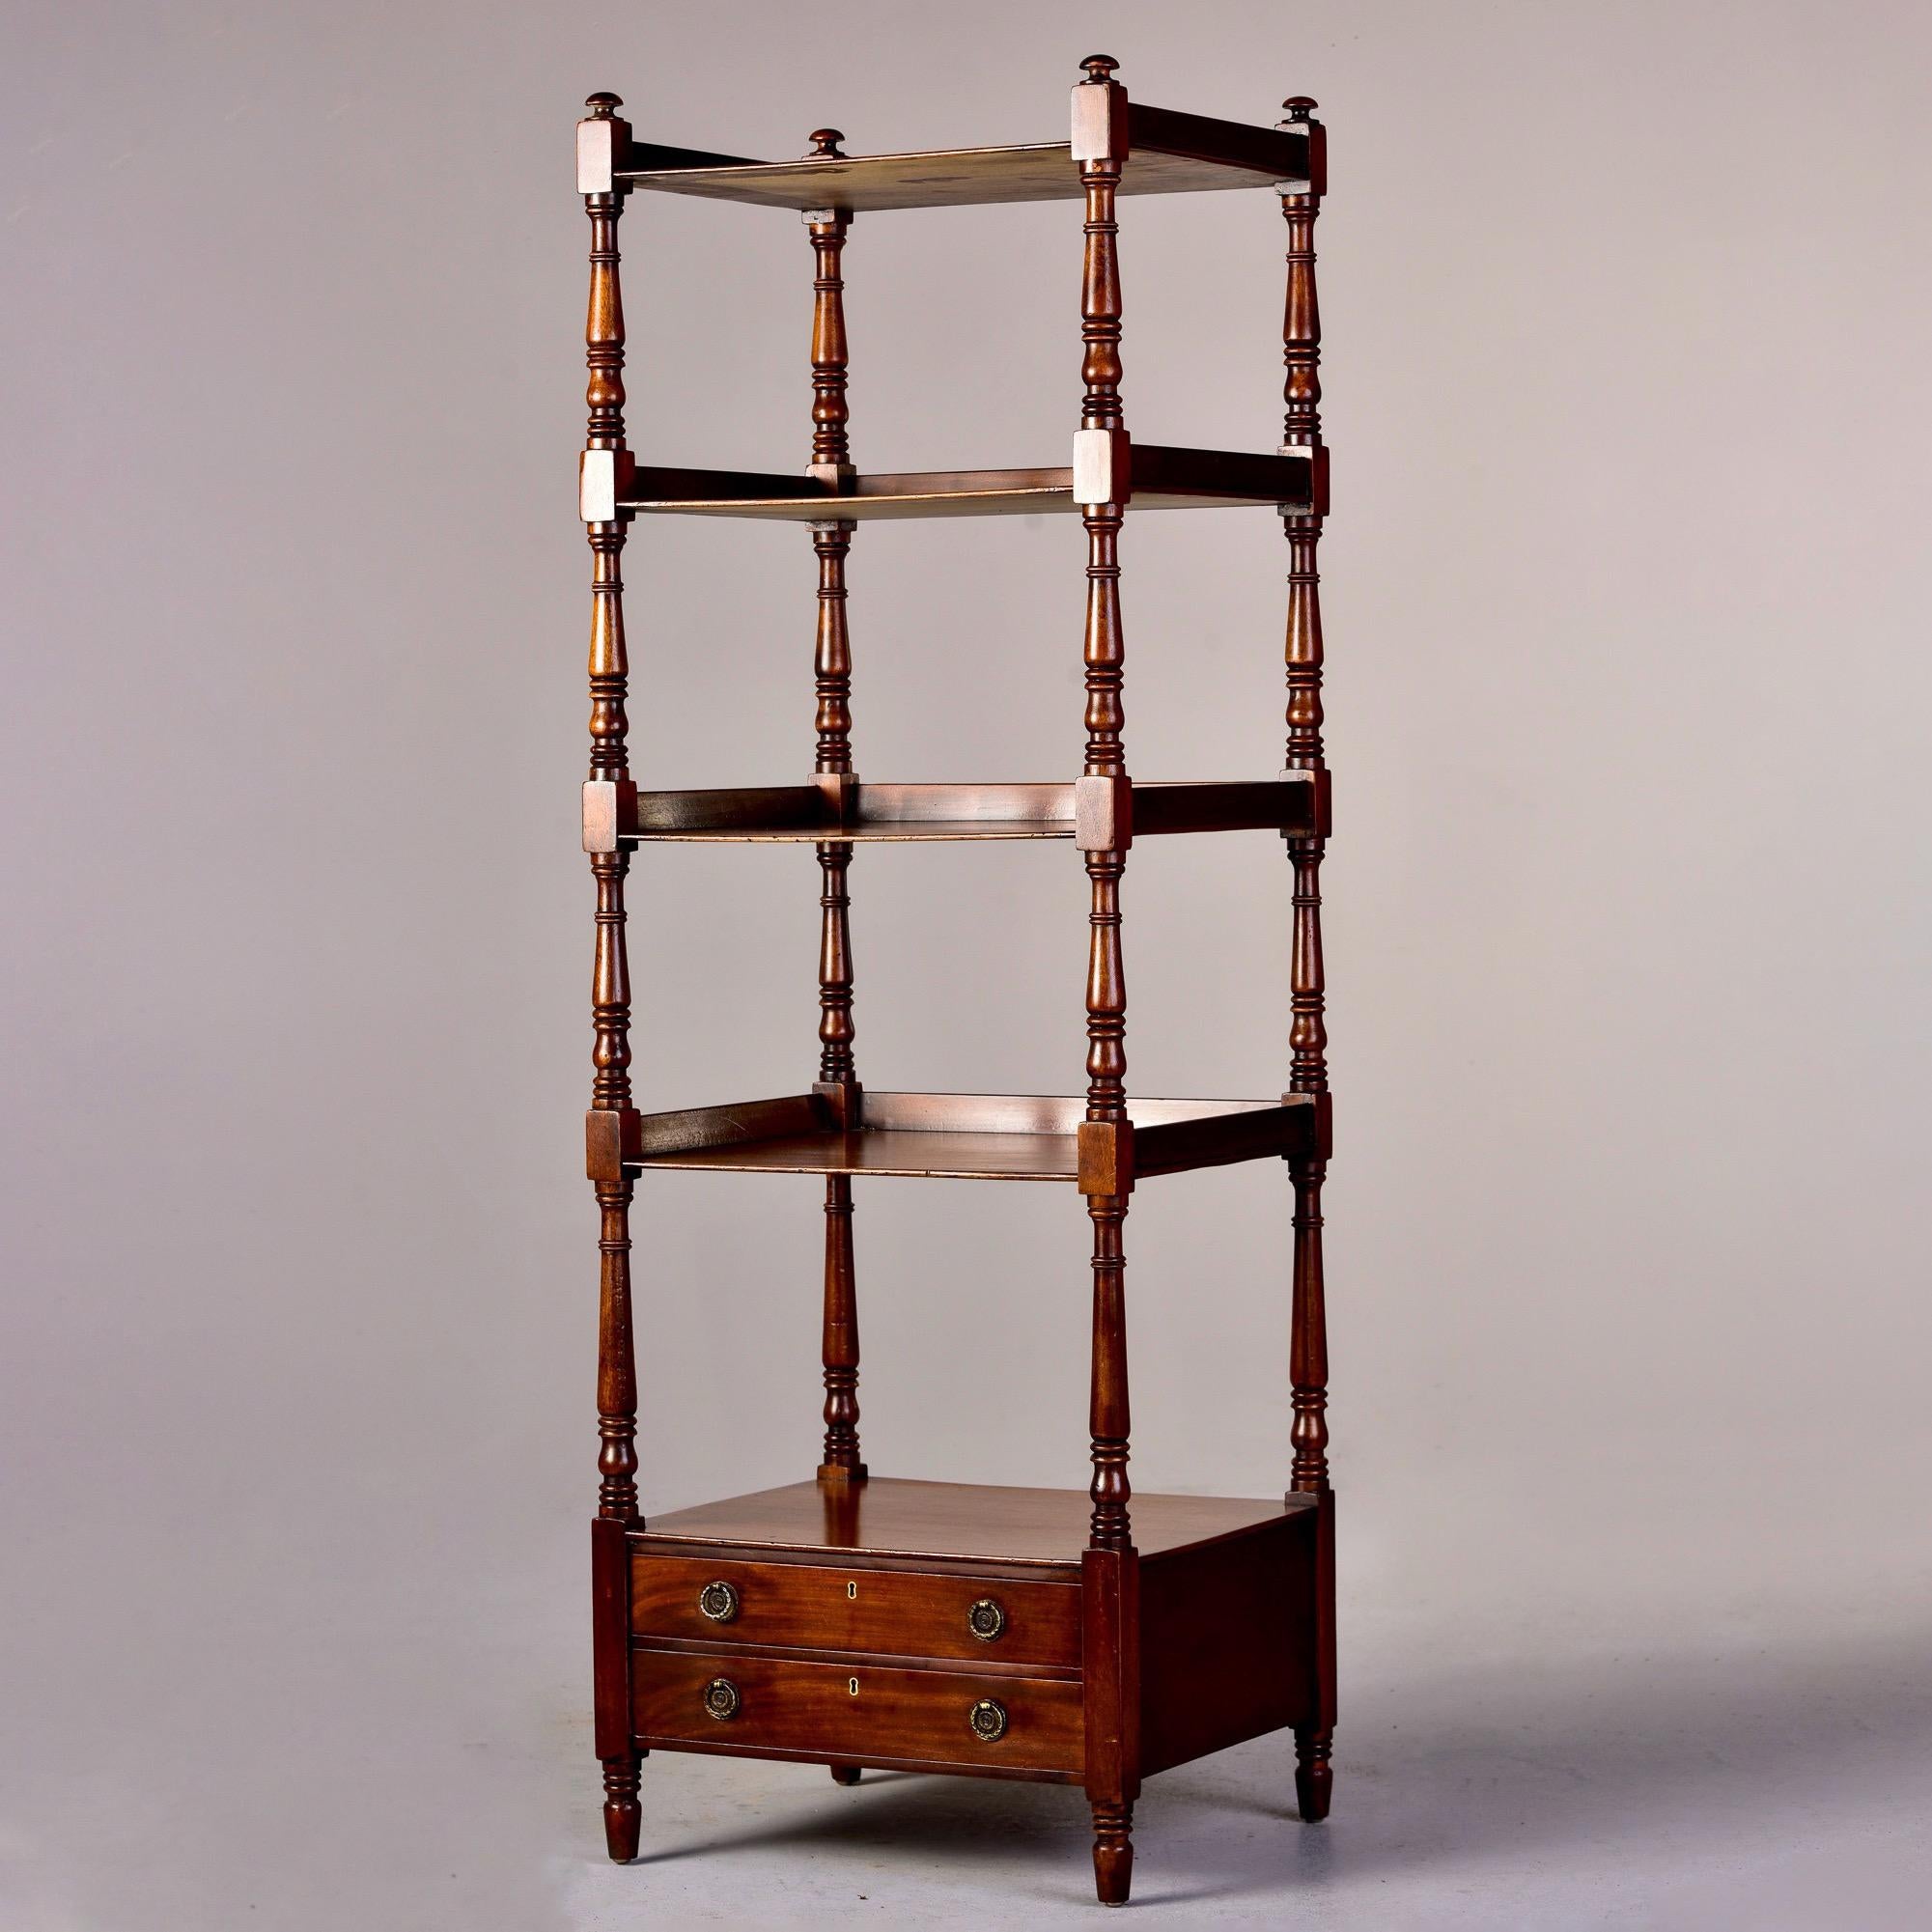 Circa 1920s English four tier mahogany etagere or what not shelves with two small drawers at base. Turned supports, original brass hardware, versatile size. Unknown maker. Very good antique condition with scattered surface wear. Key to drawers is